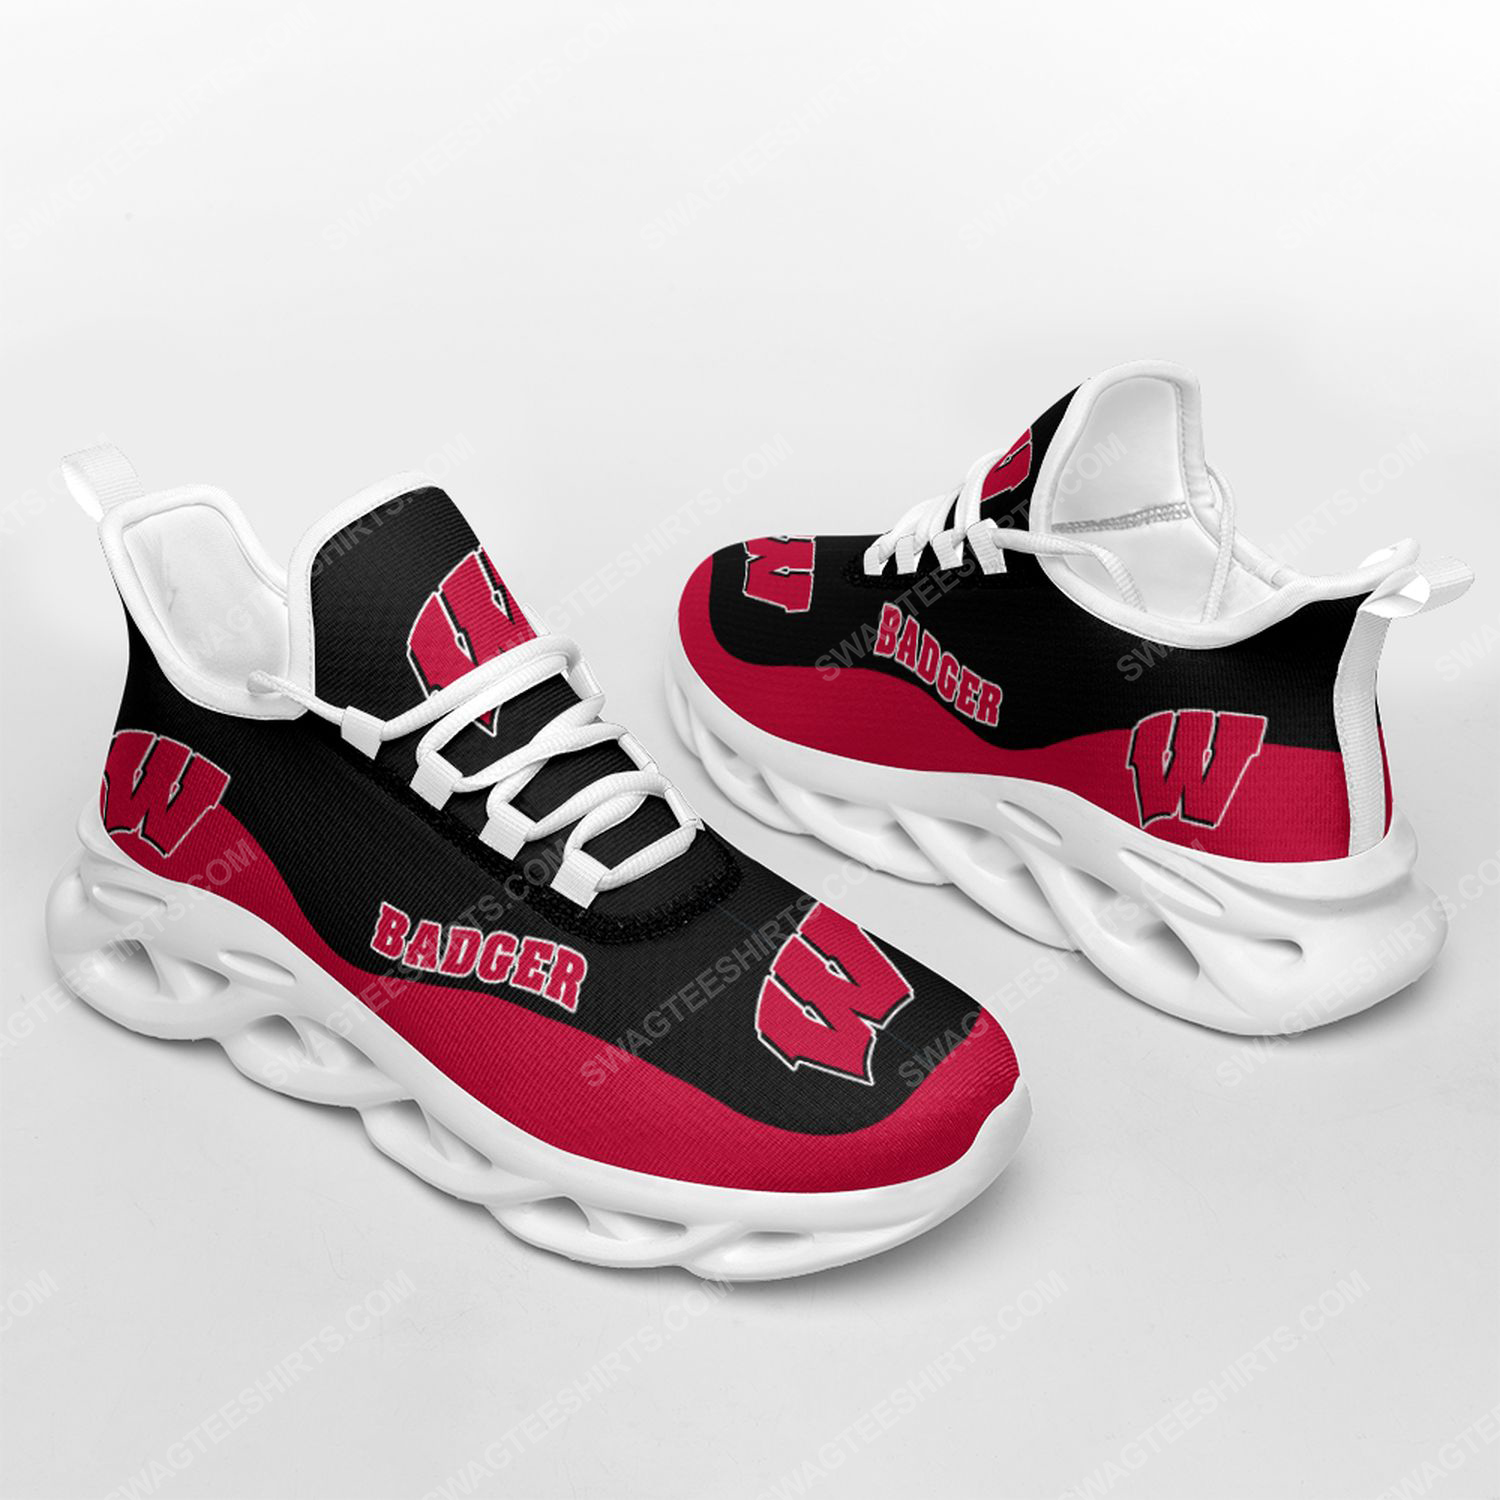 The wisconsin badgers football team max soul shoes 2